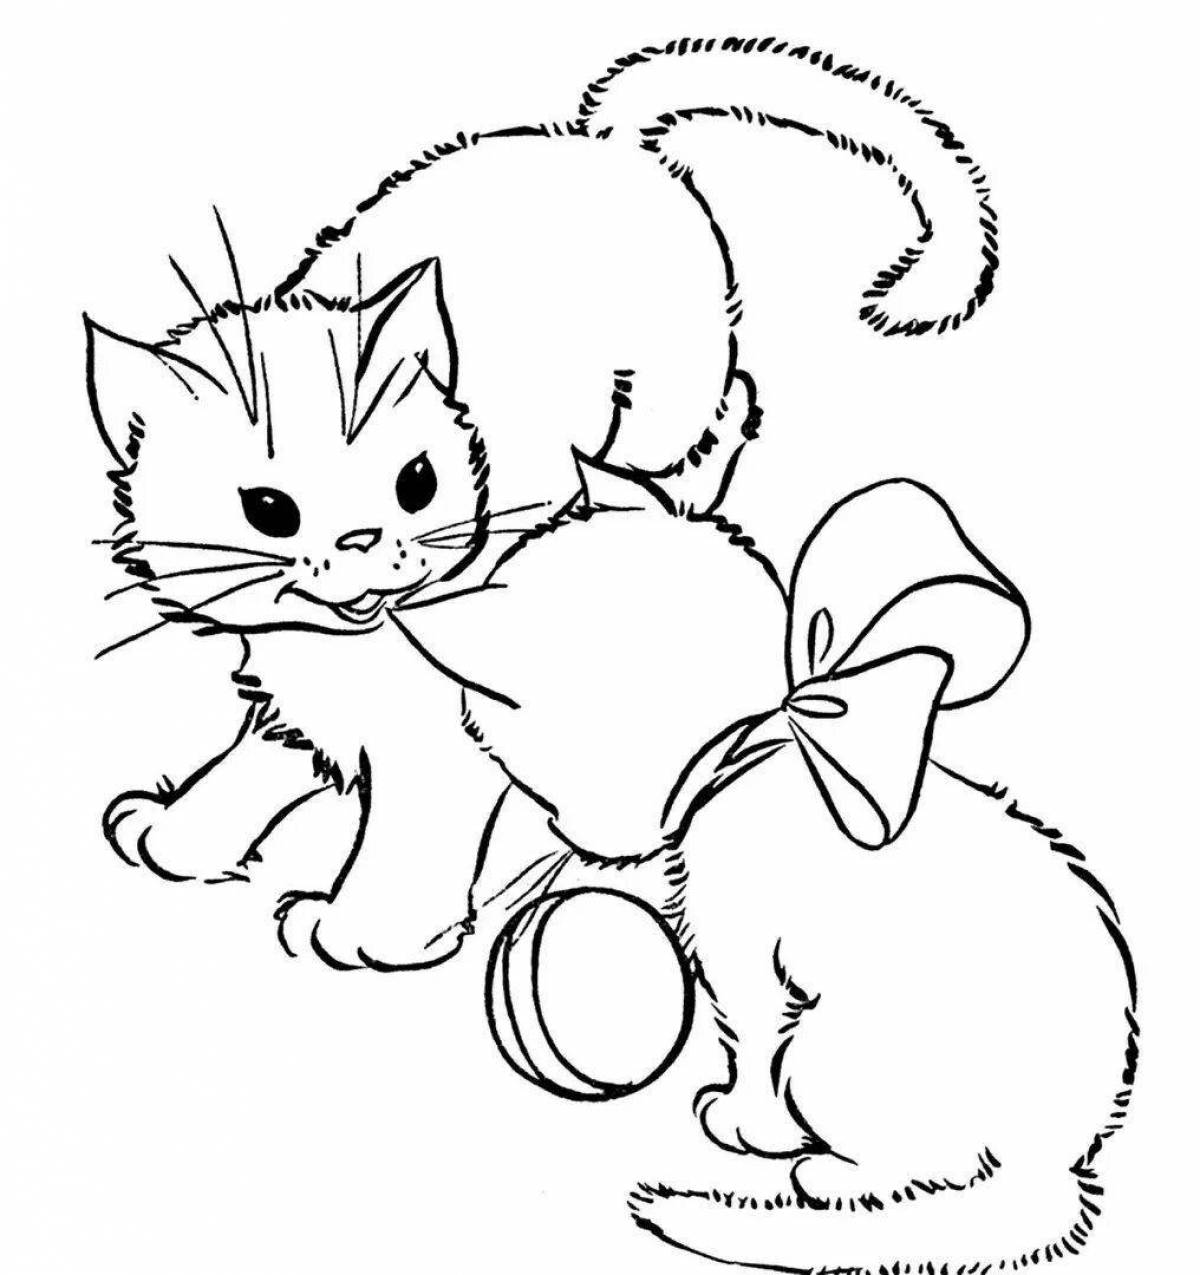 Relaxed cat coloring page